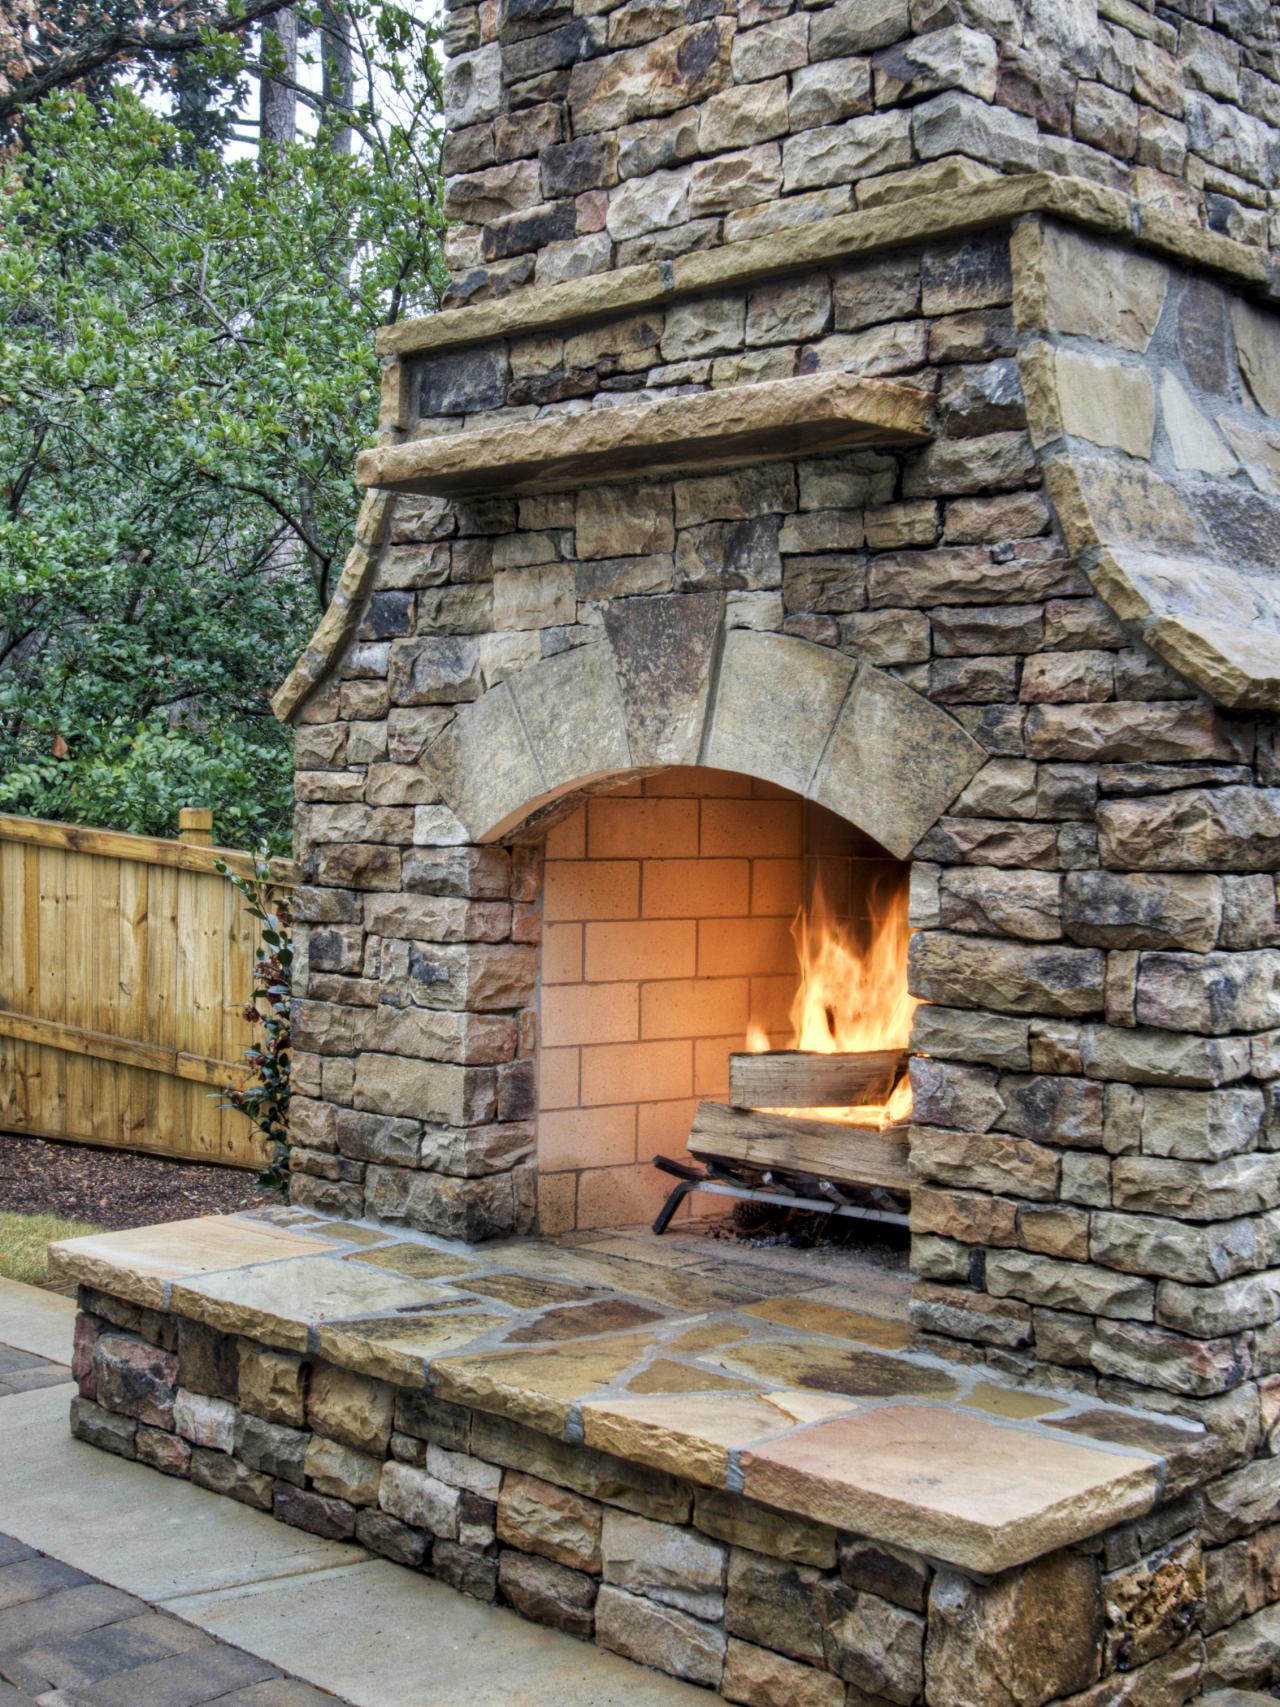 Outdoor Stacked Stone Fireplace, Pictures Of Outdoor Stone Fireplaces